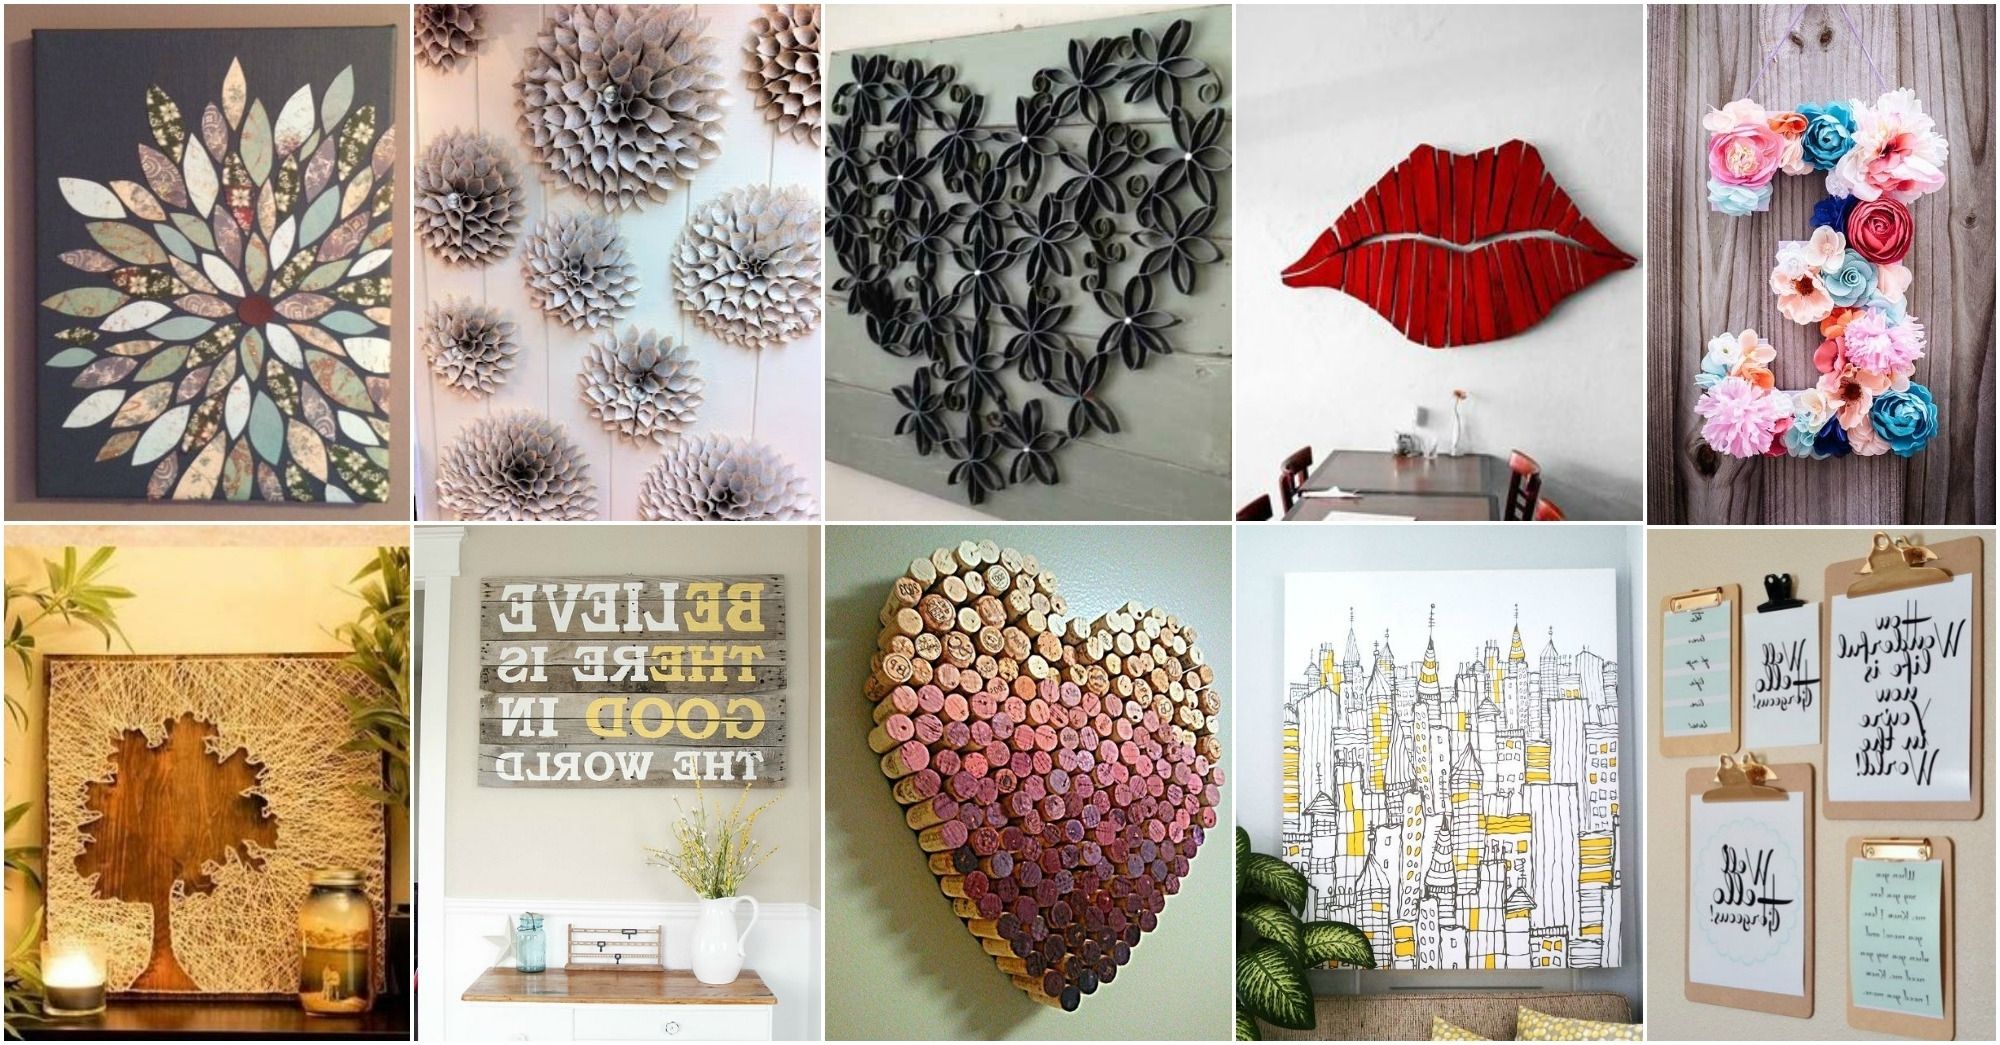 2017 More Amazing Diy Wall Art Ideas In Diy Wall Art (View 6 of 15)